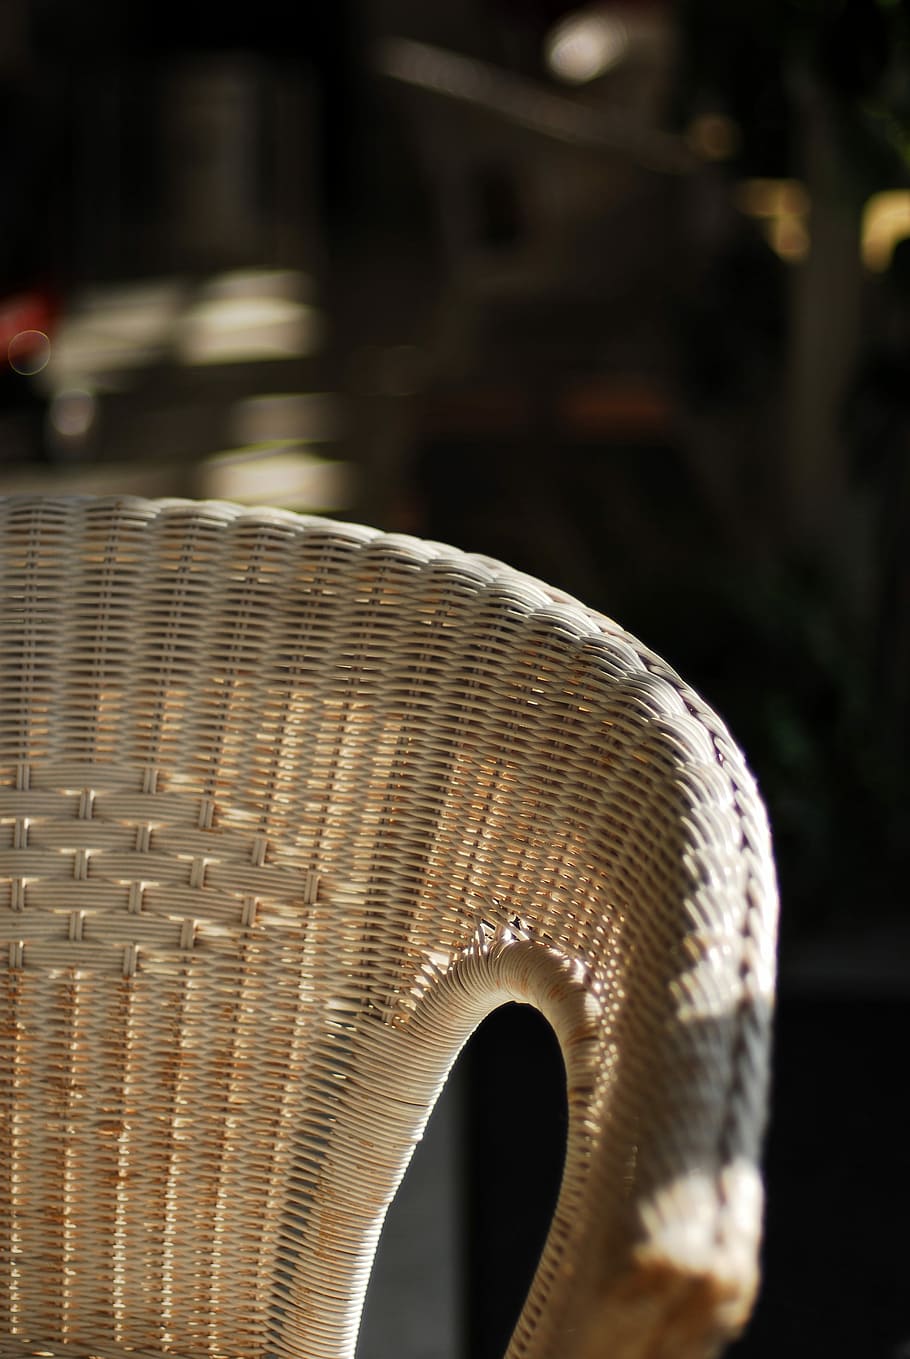 Chair, Rattan, Backrest, Hinata, focus on foreground, outdoors, close-up, day, city, pattern